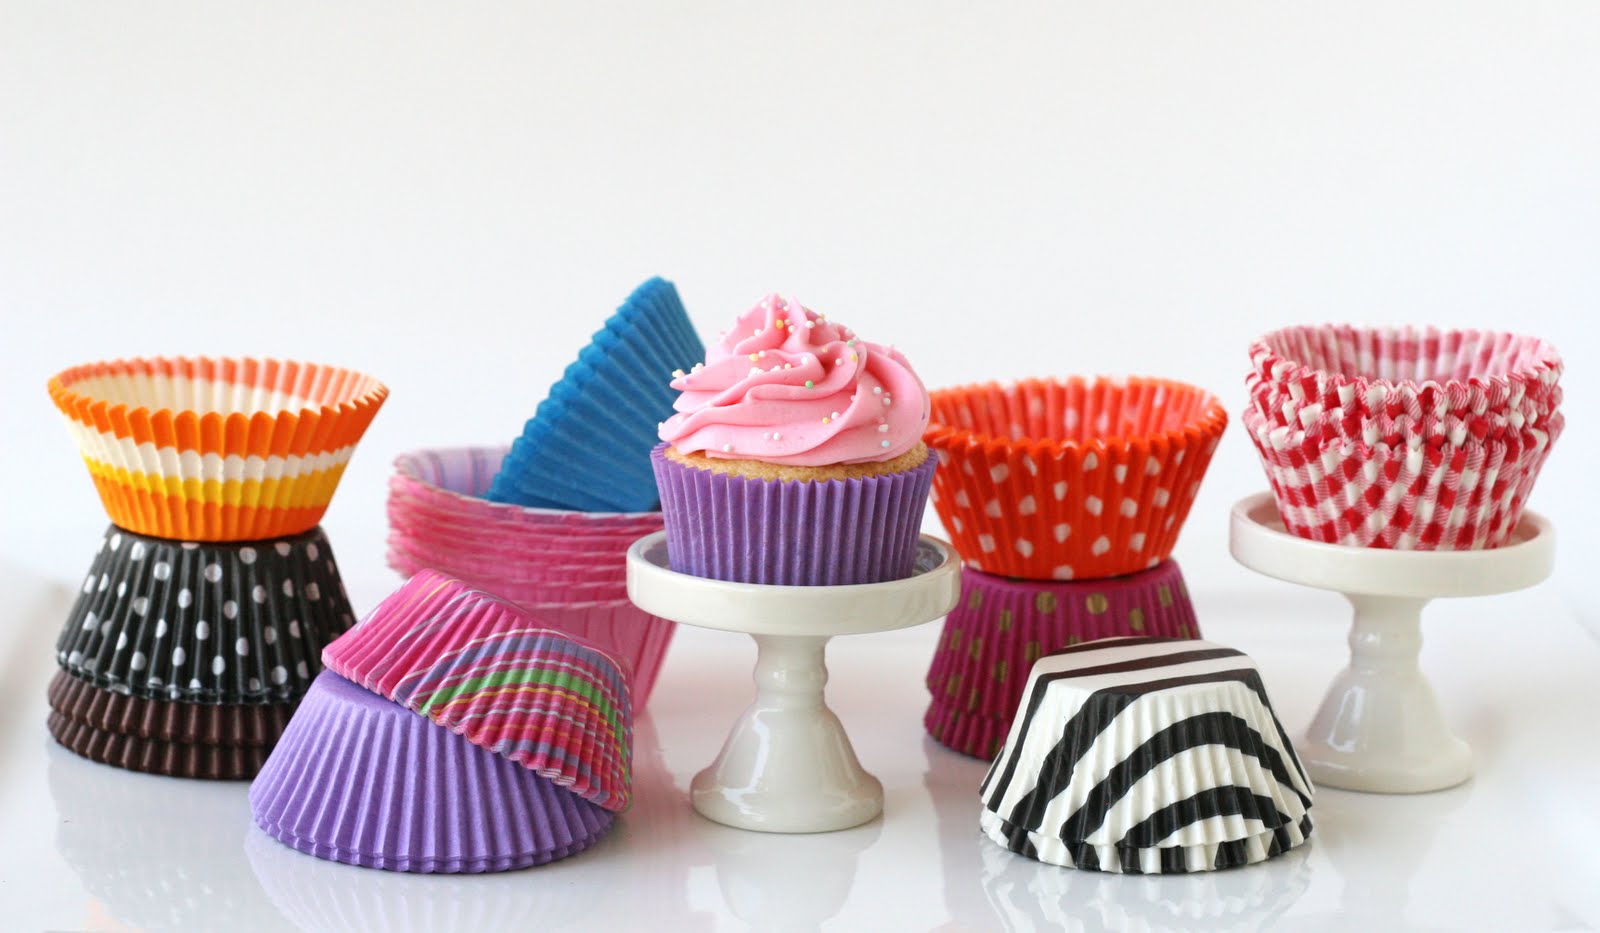 Details about  / Cupcake Case Liners Baking Muffin Paper Cases 150 Count